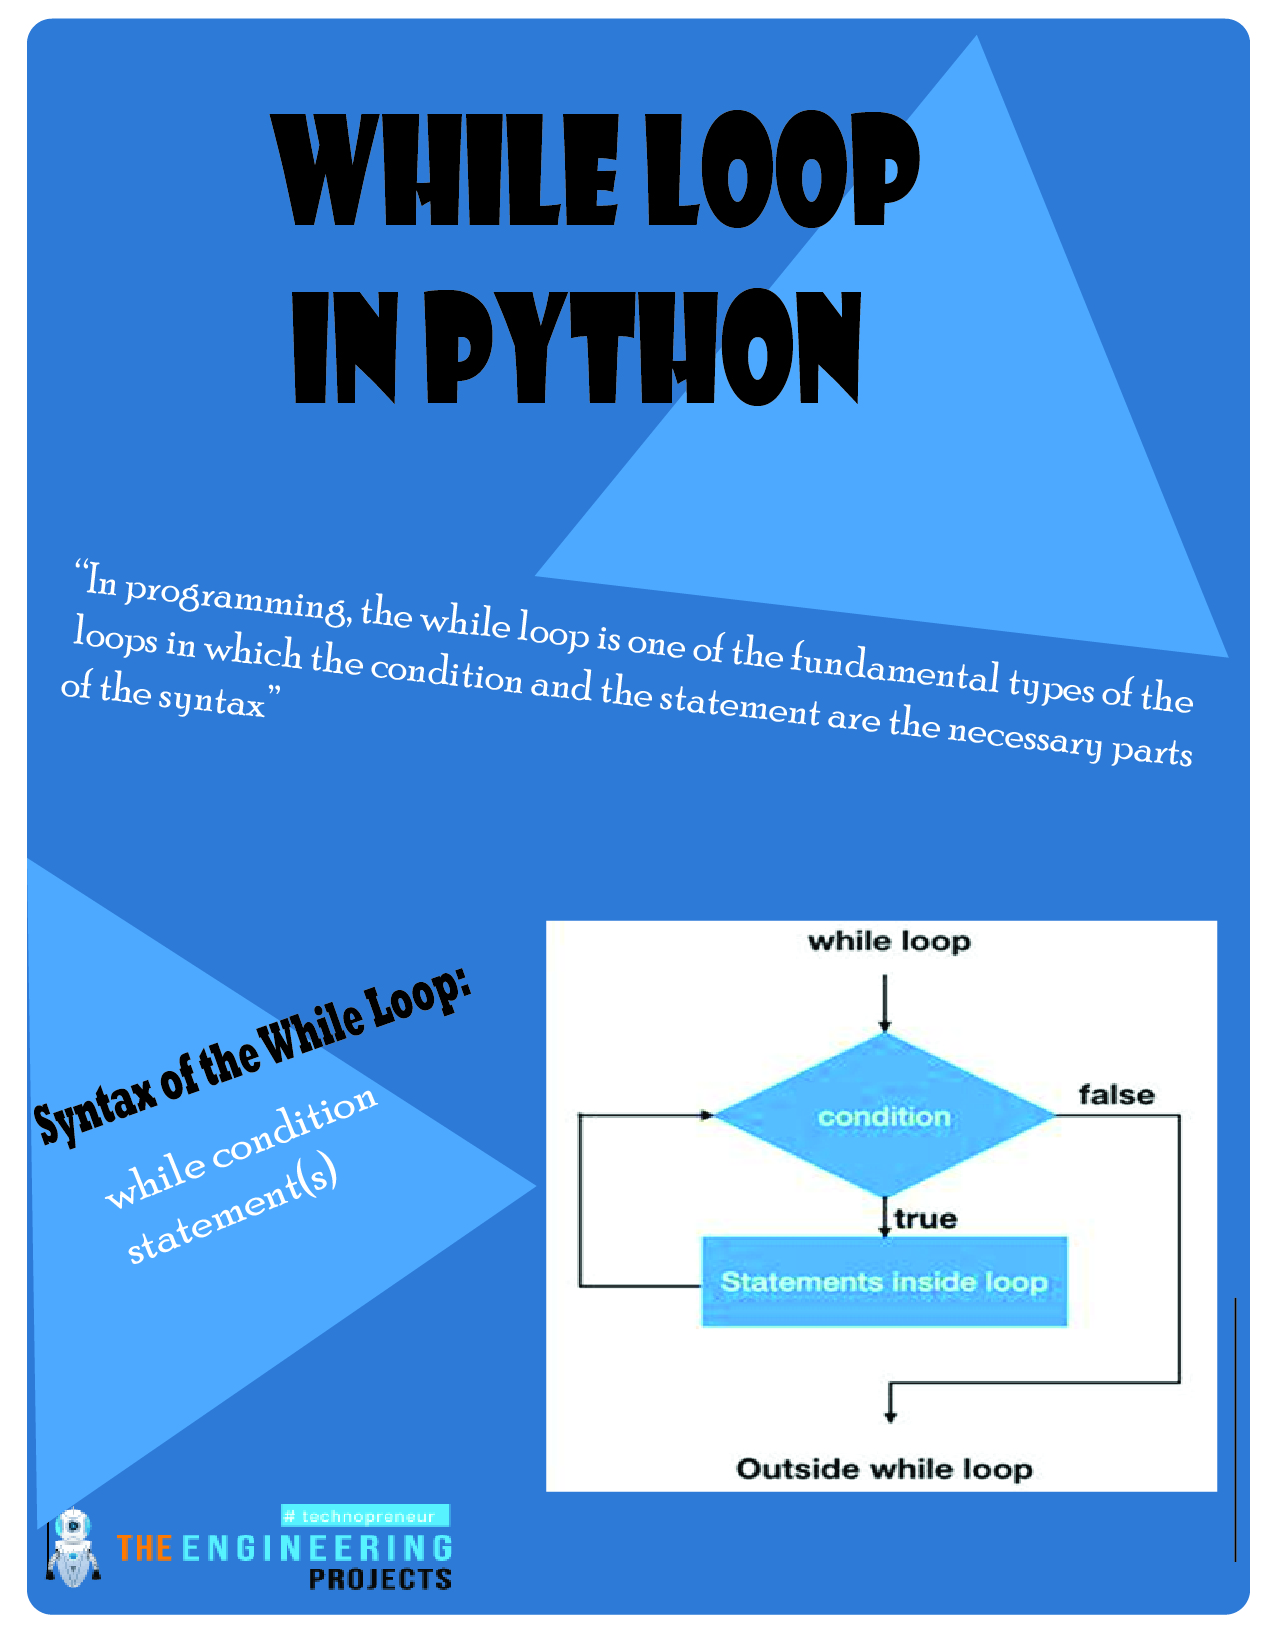 loops in python, python loops, how do loops work in python, python loop working, types of loops in python